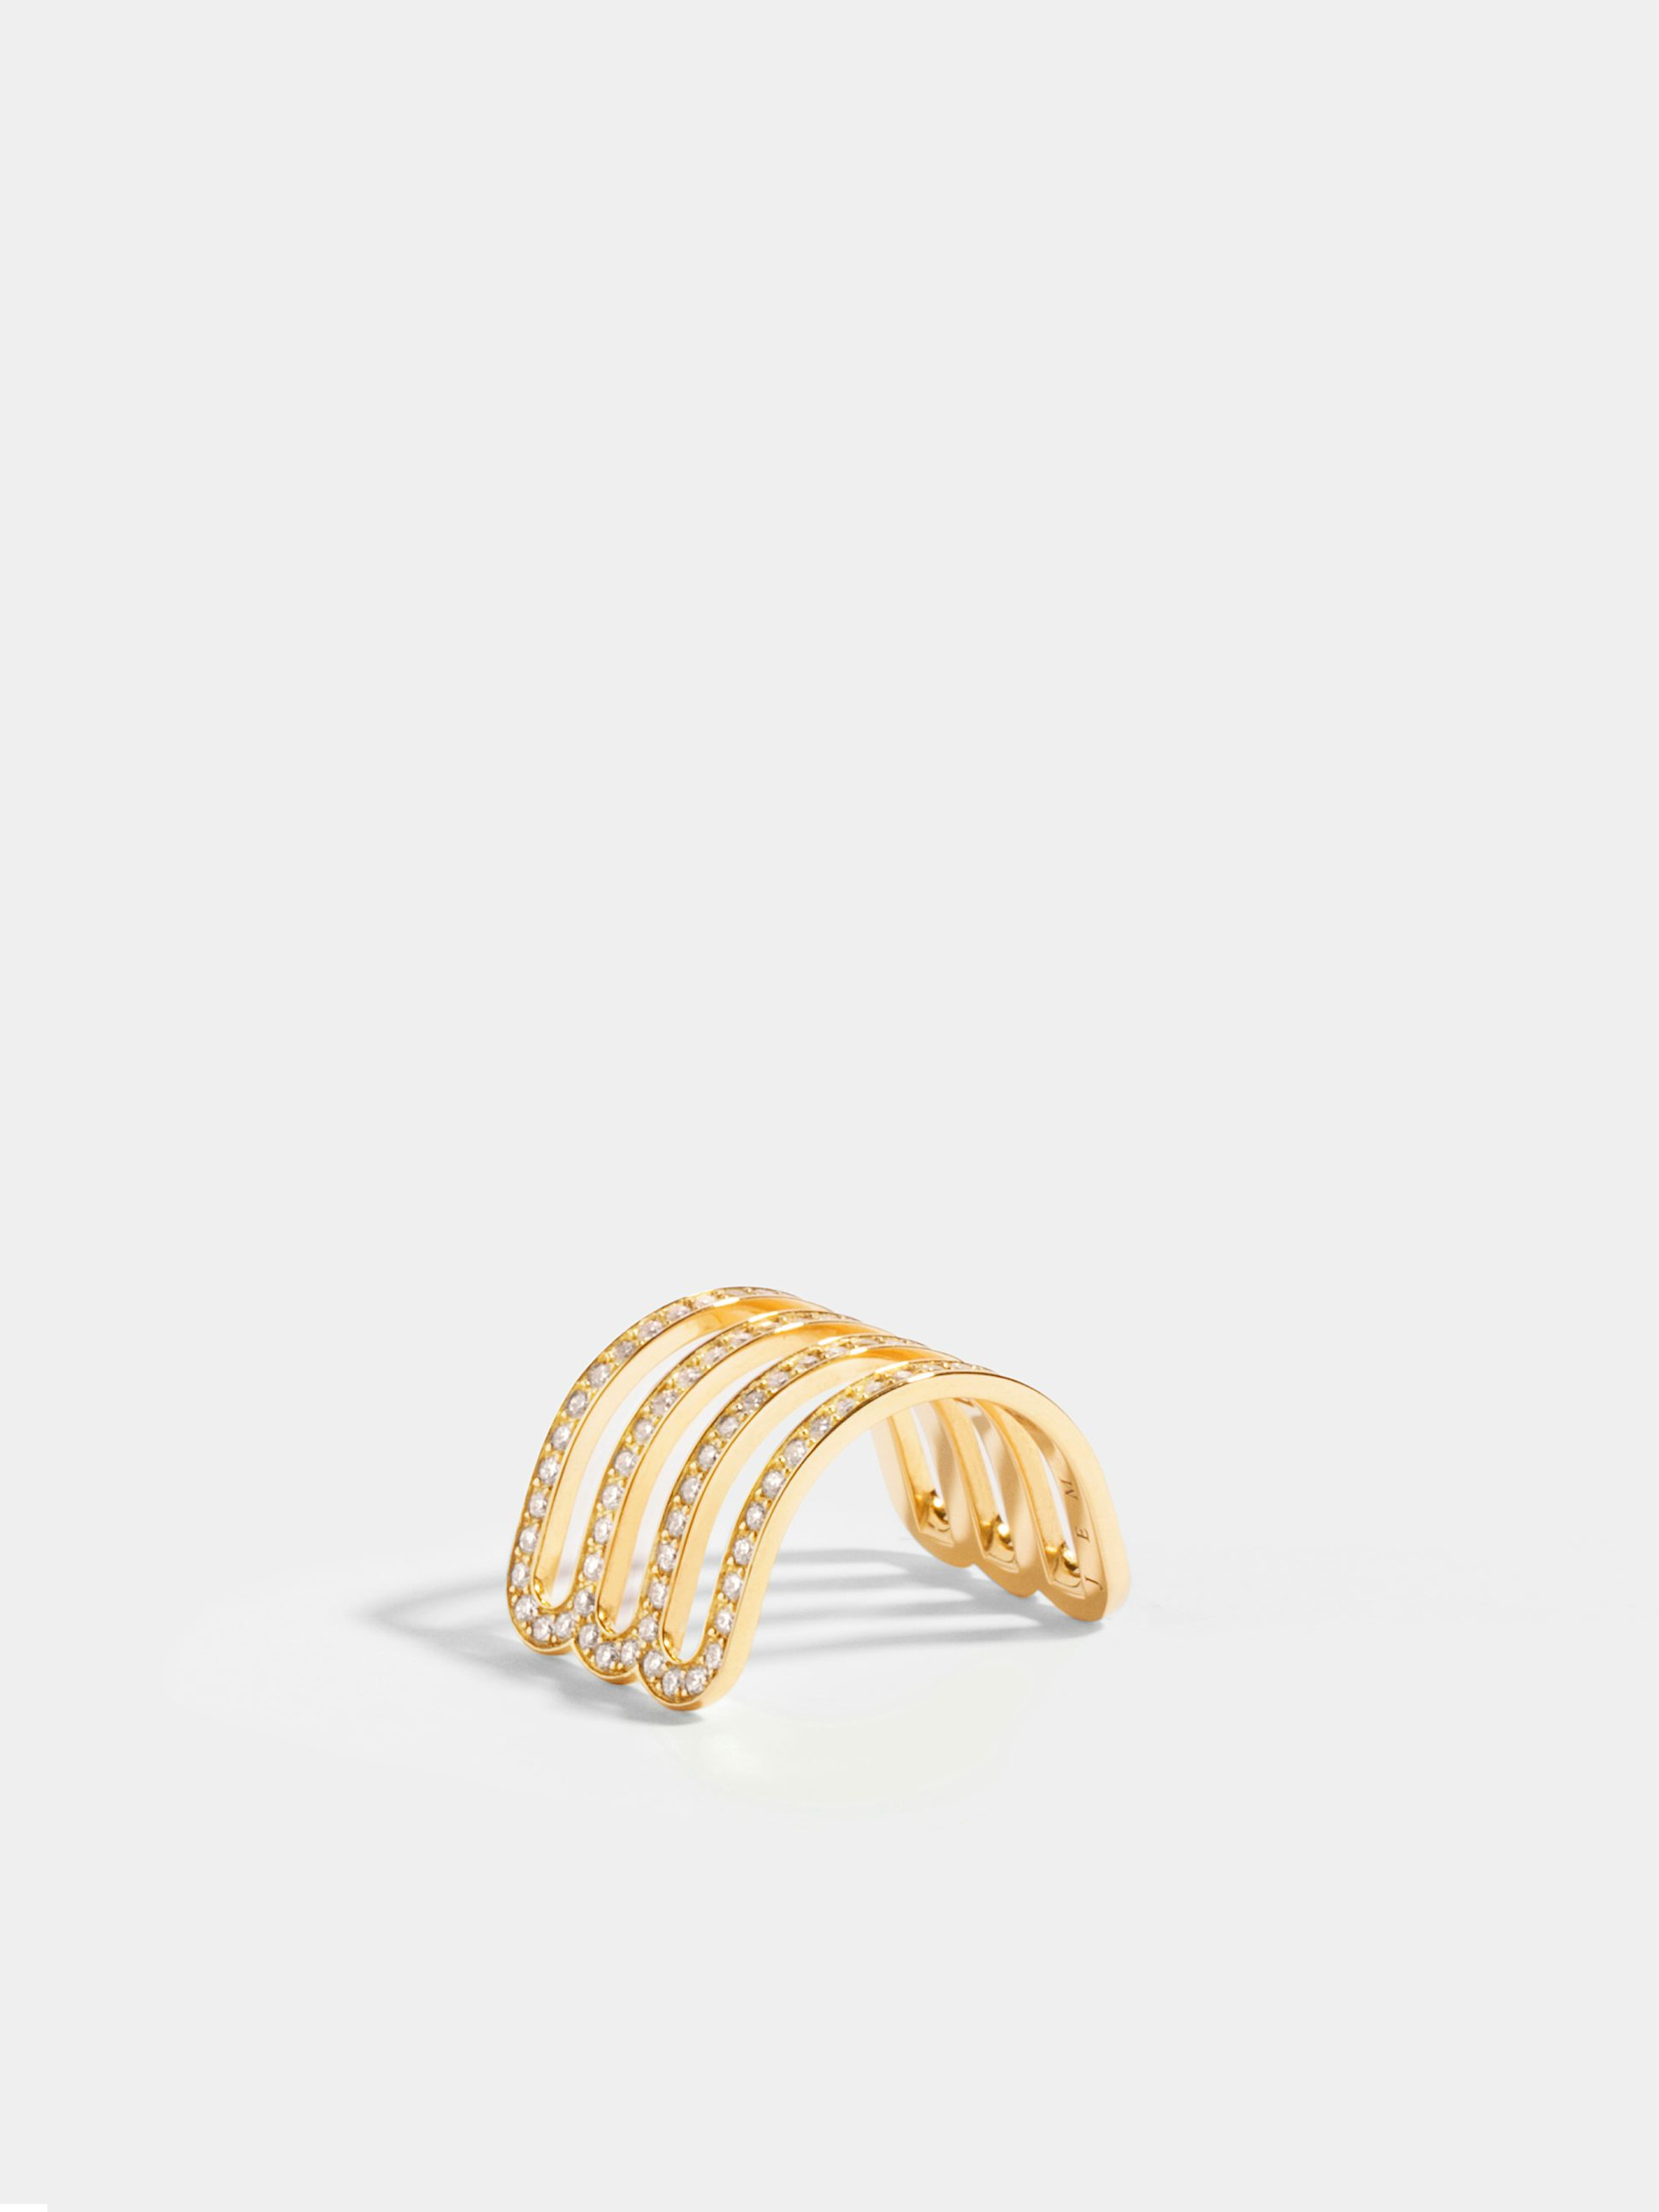 Étreintes triple half-ring in 18k Fairmined ethical yellow gold, paved with lab-grown diamonds.